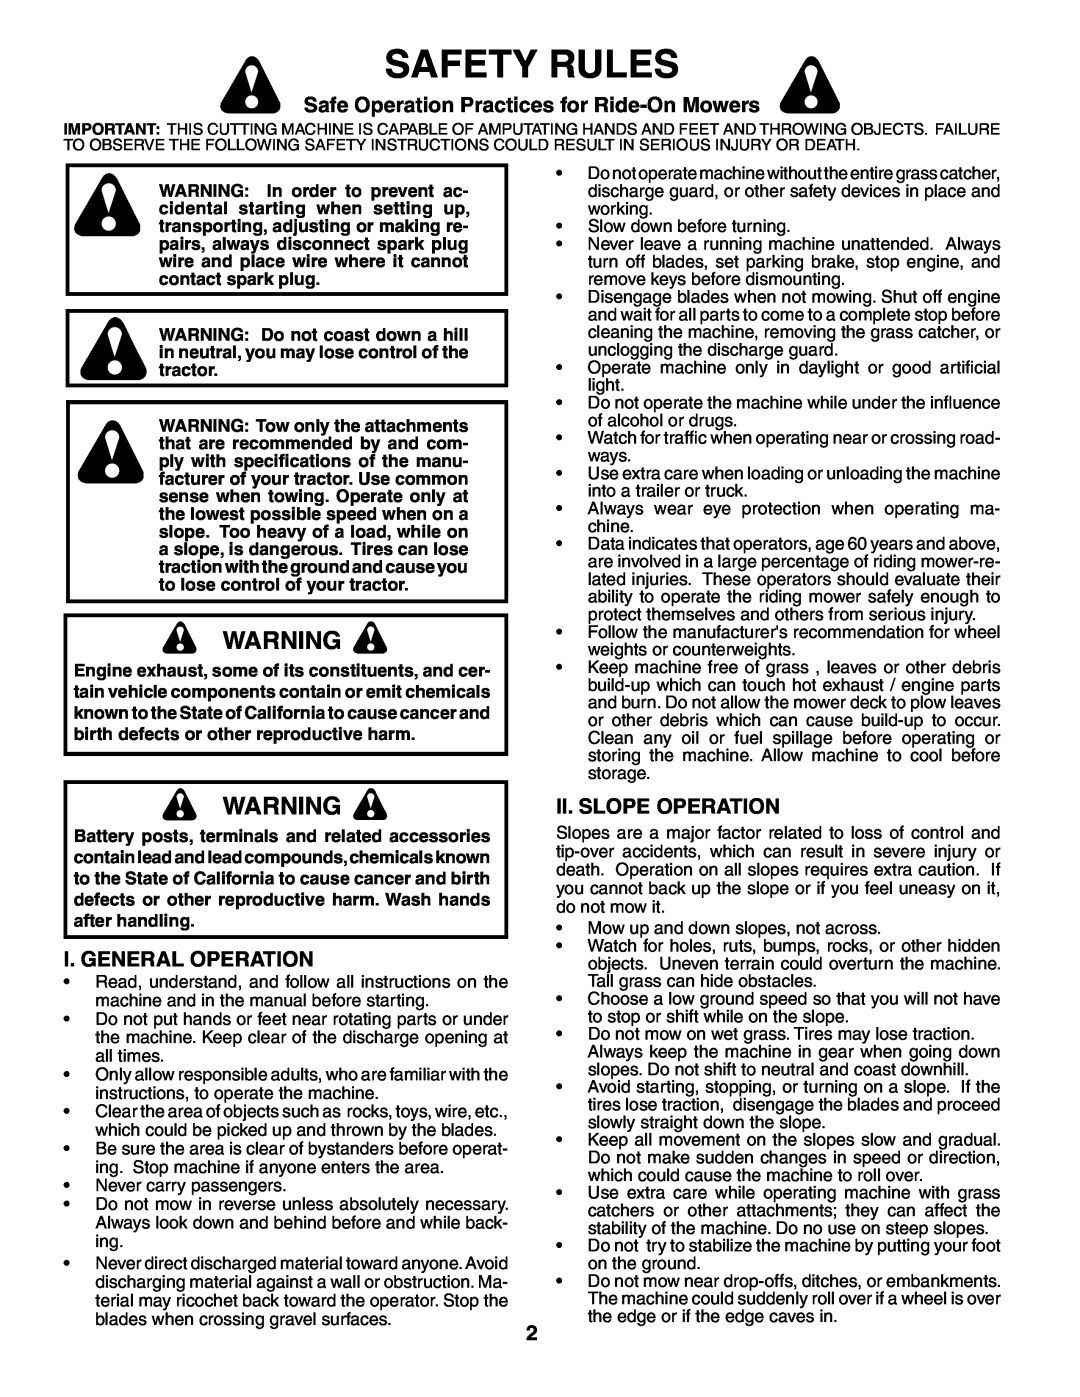 Poulan 195018 manual Safety Rules, Safe Operation Practices for Ride-On Mowers, I. General Operation, Ii. Slope Operation 